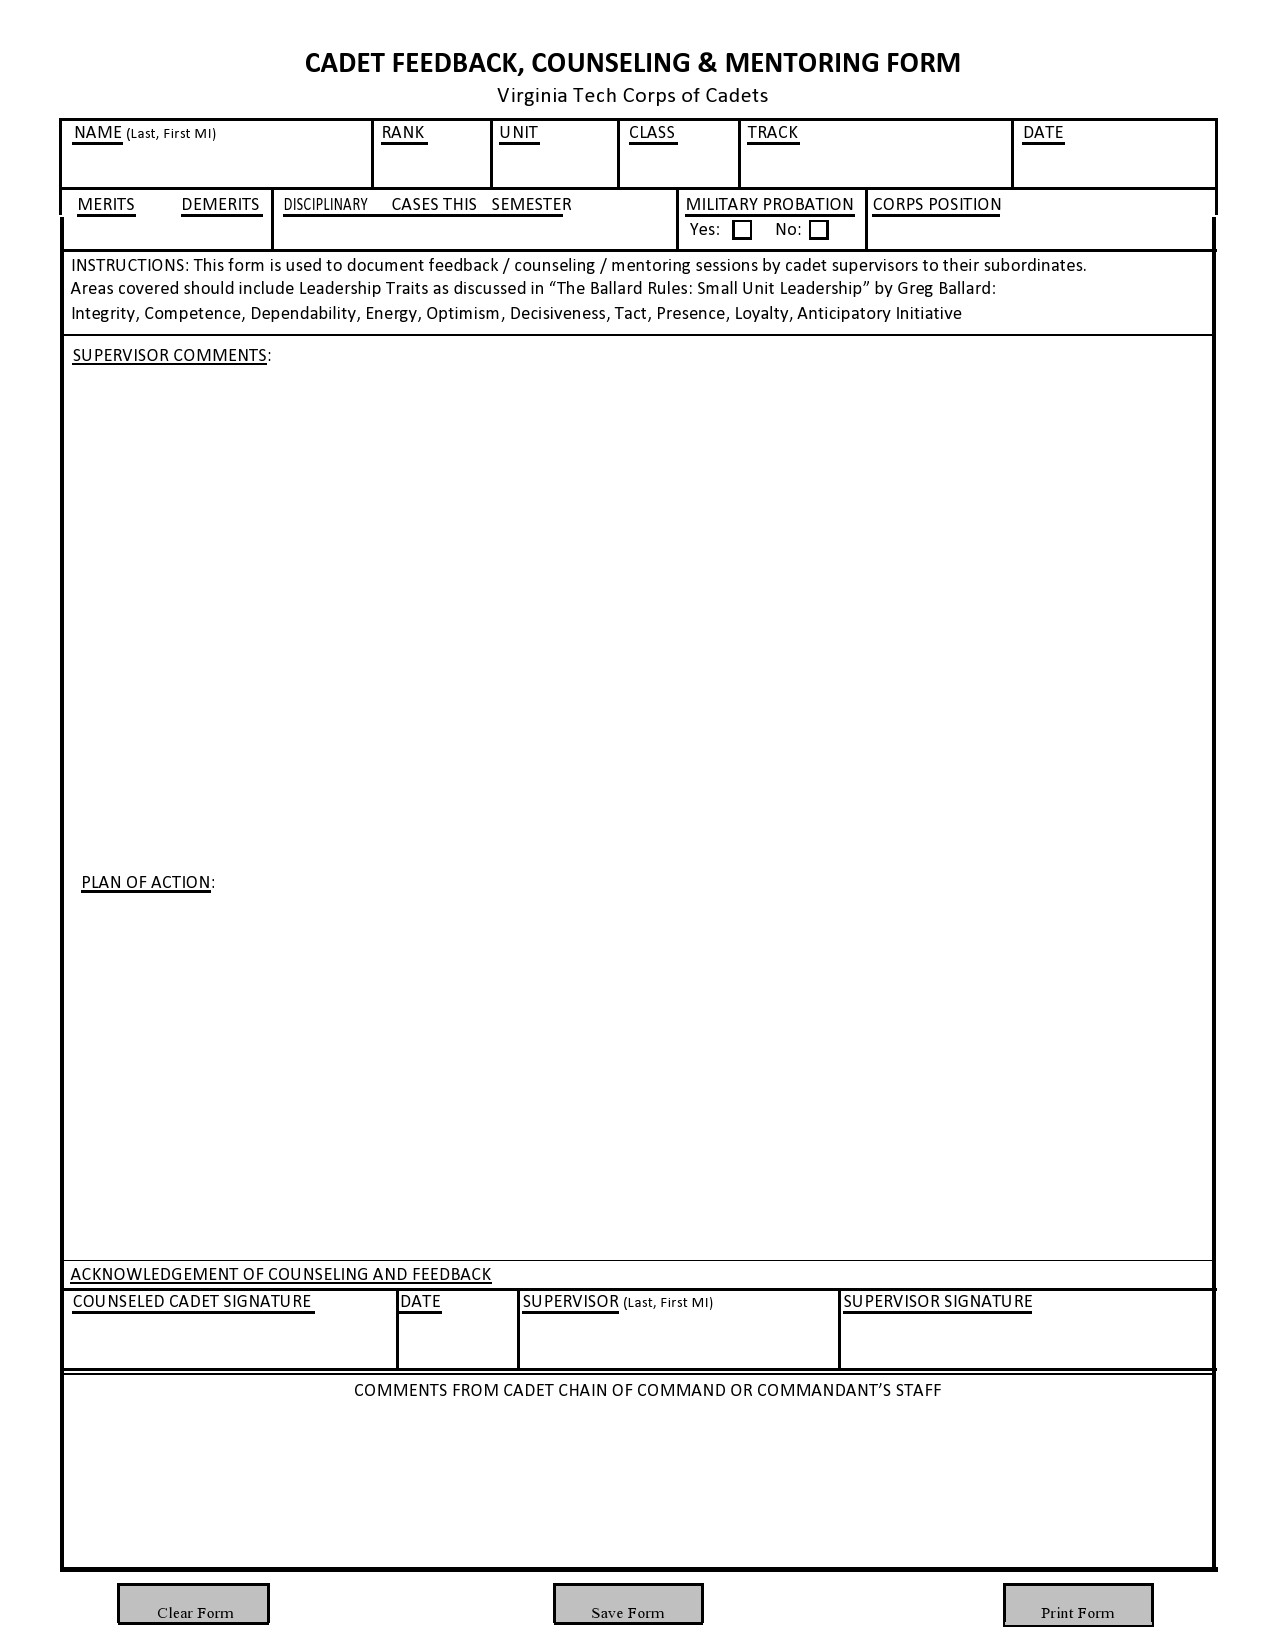 Free army counseling form 22